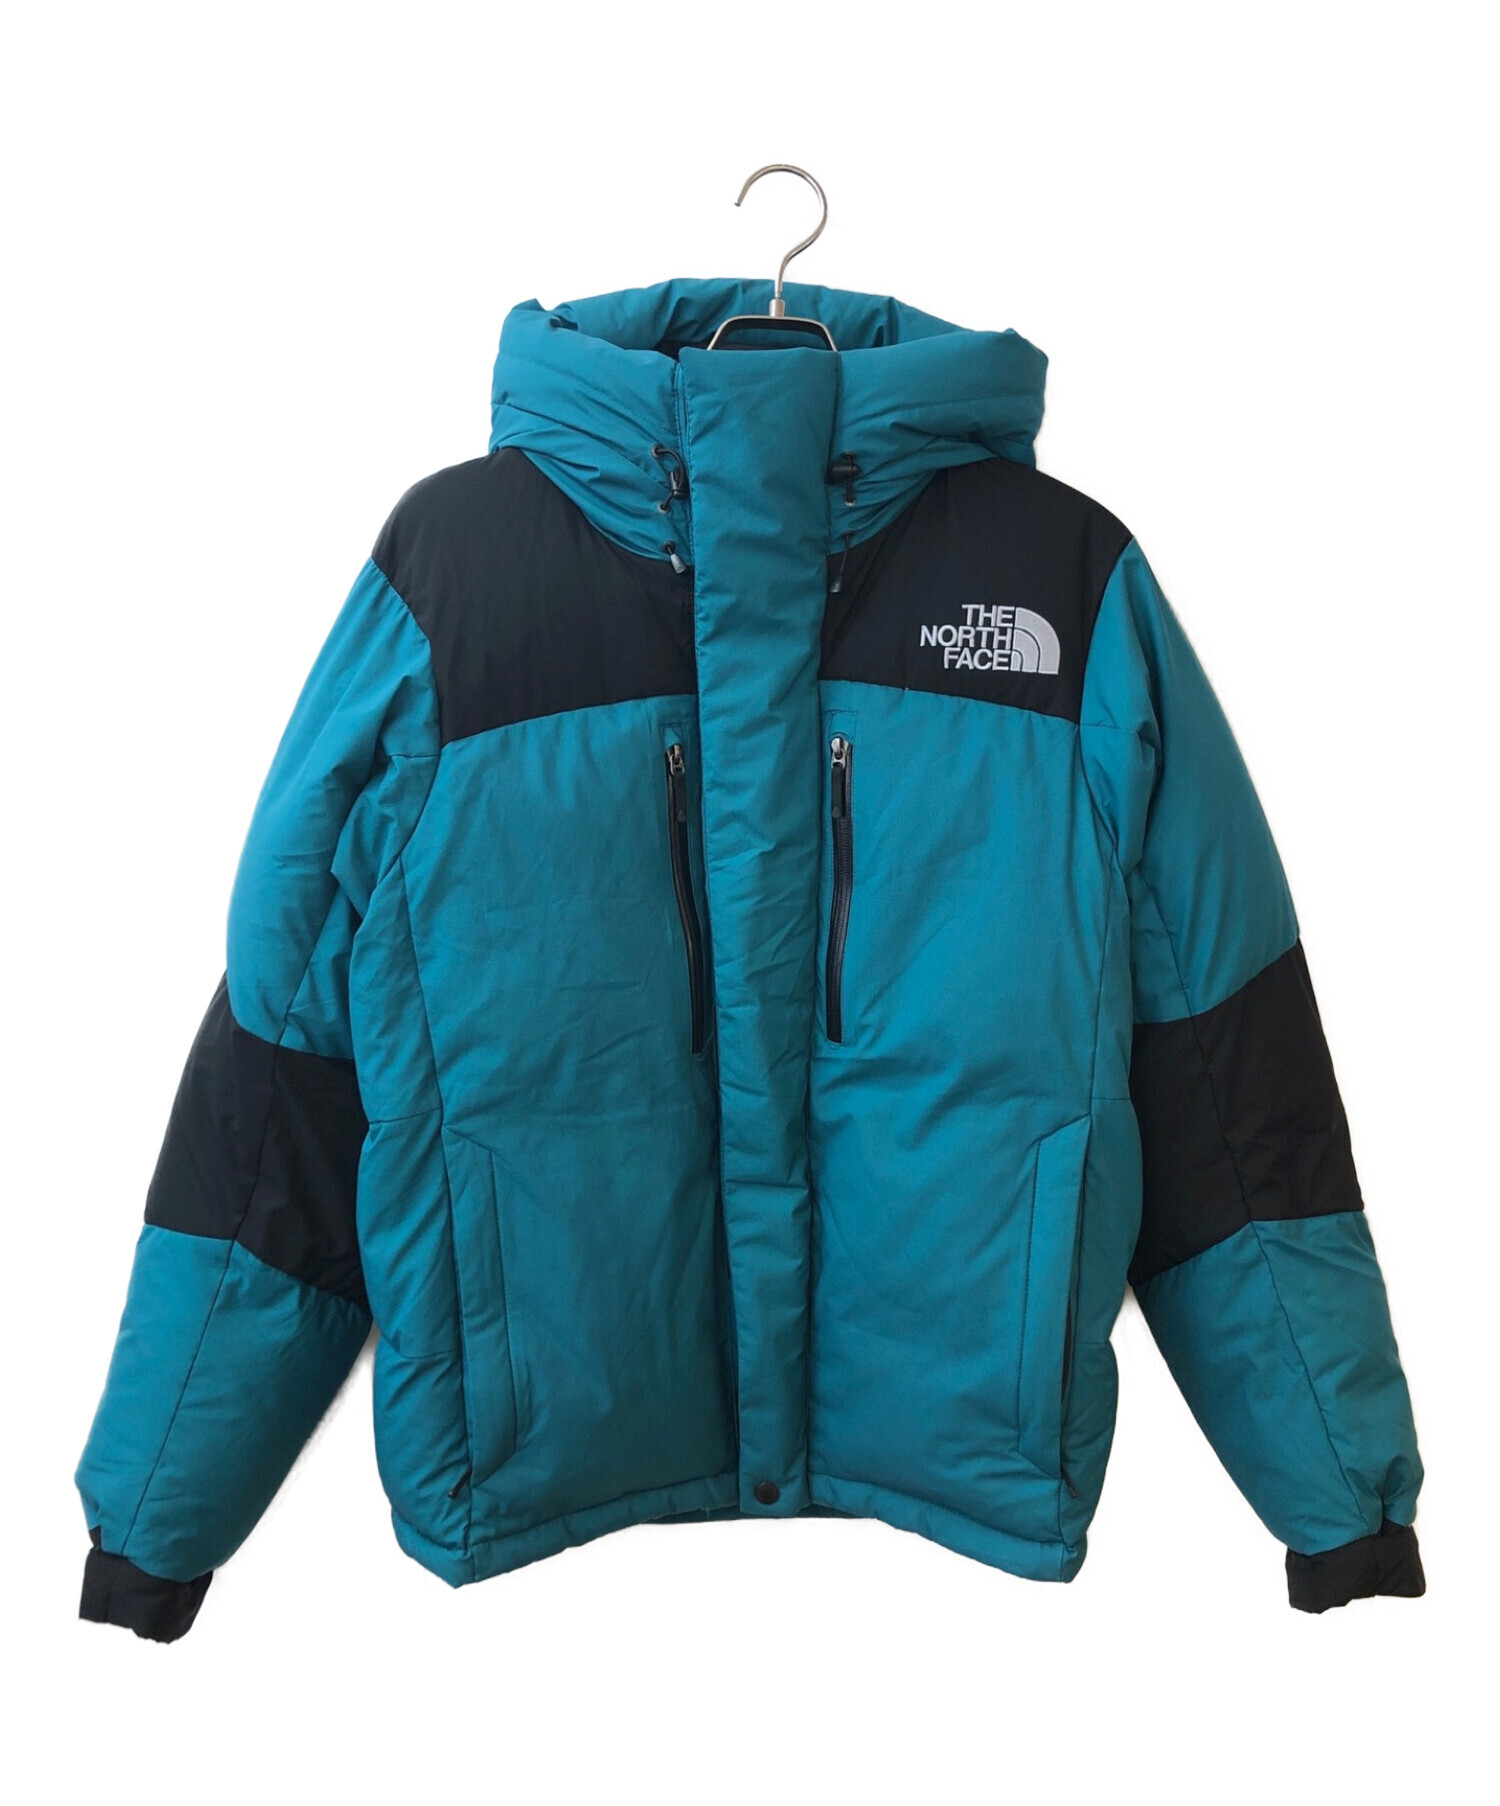 L Baltro Light Jacket THE NORTH FACE